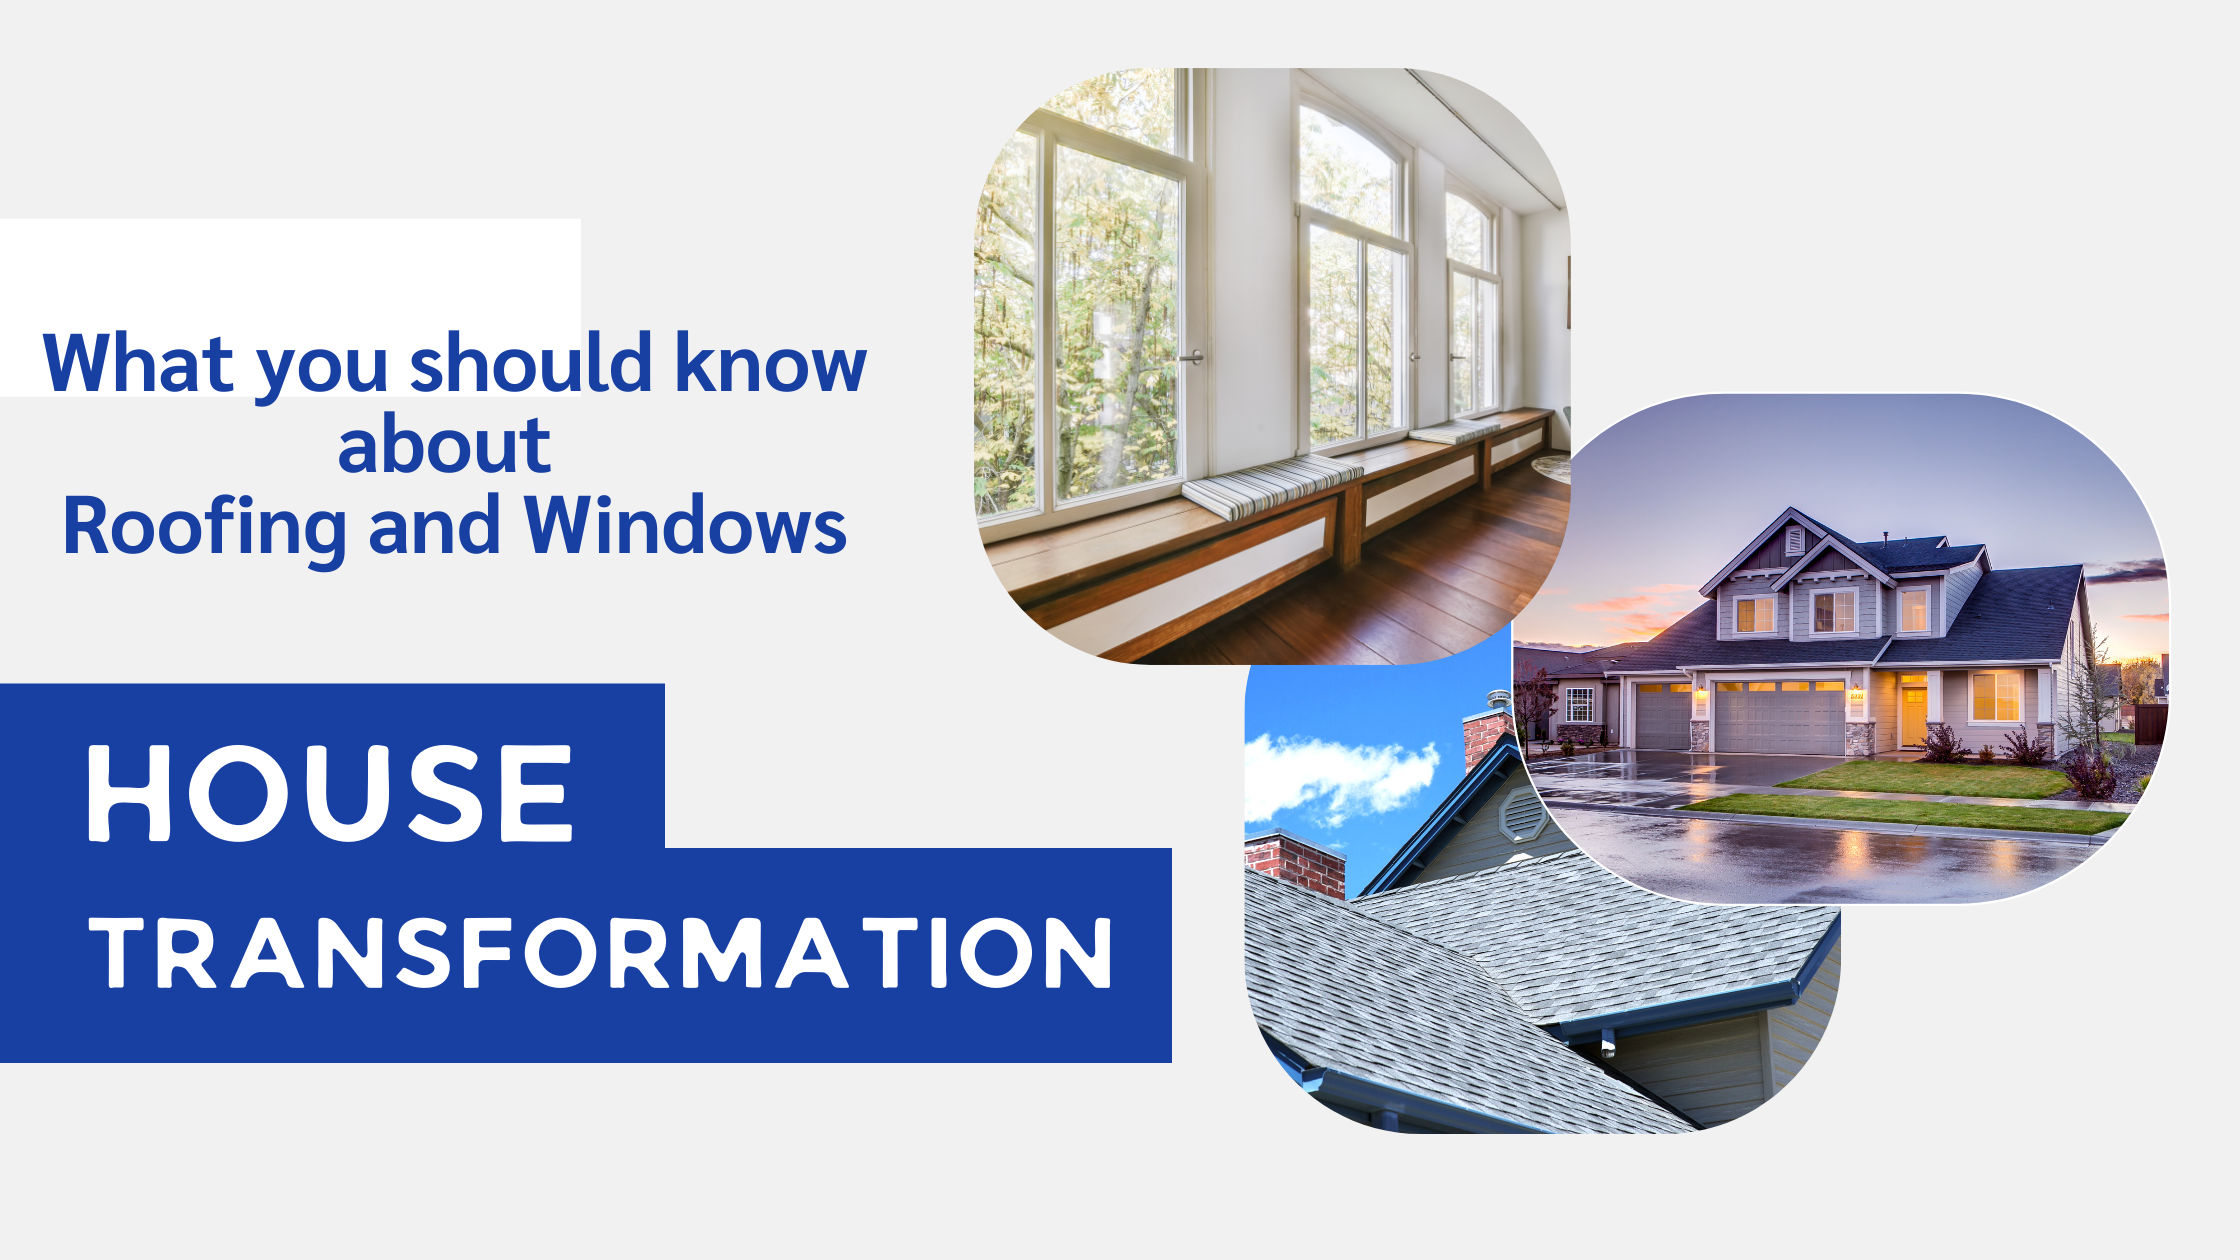 House Transformation: What you should know about Roofing and Windows